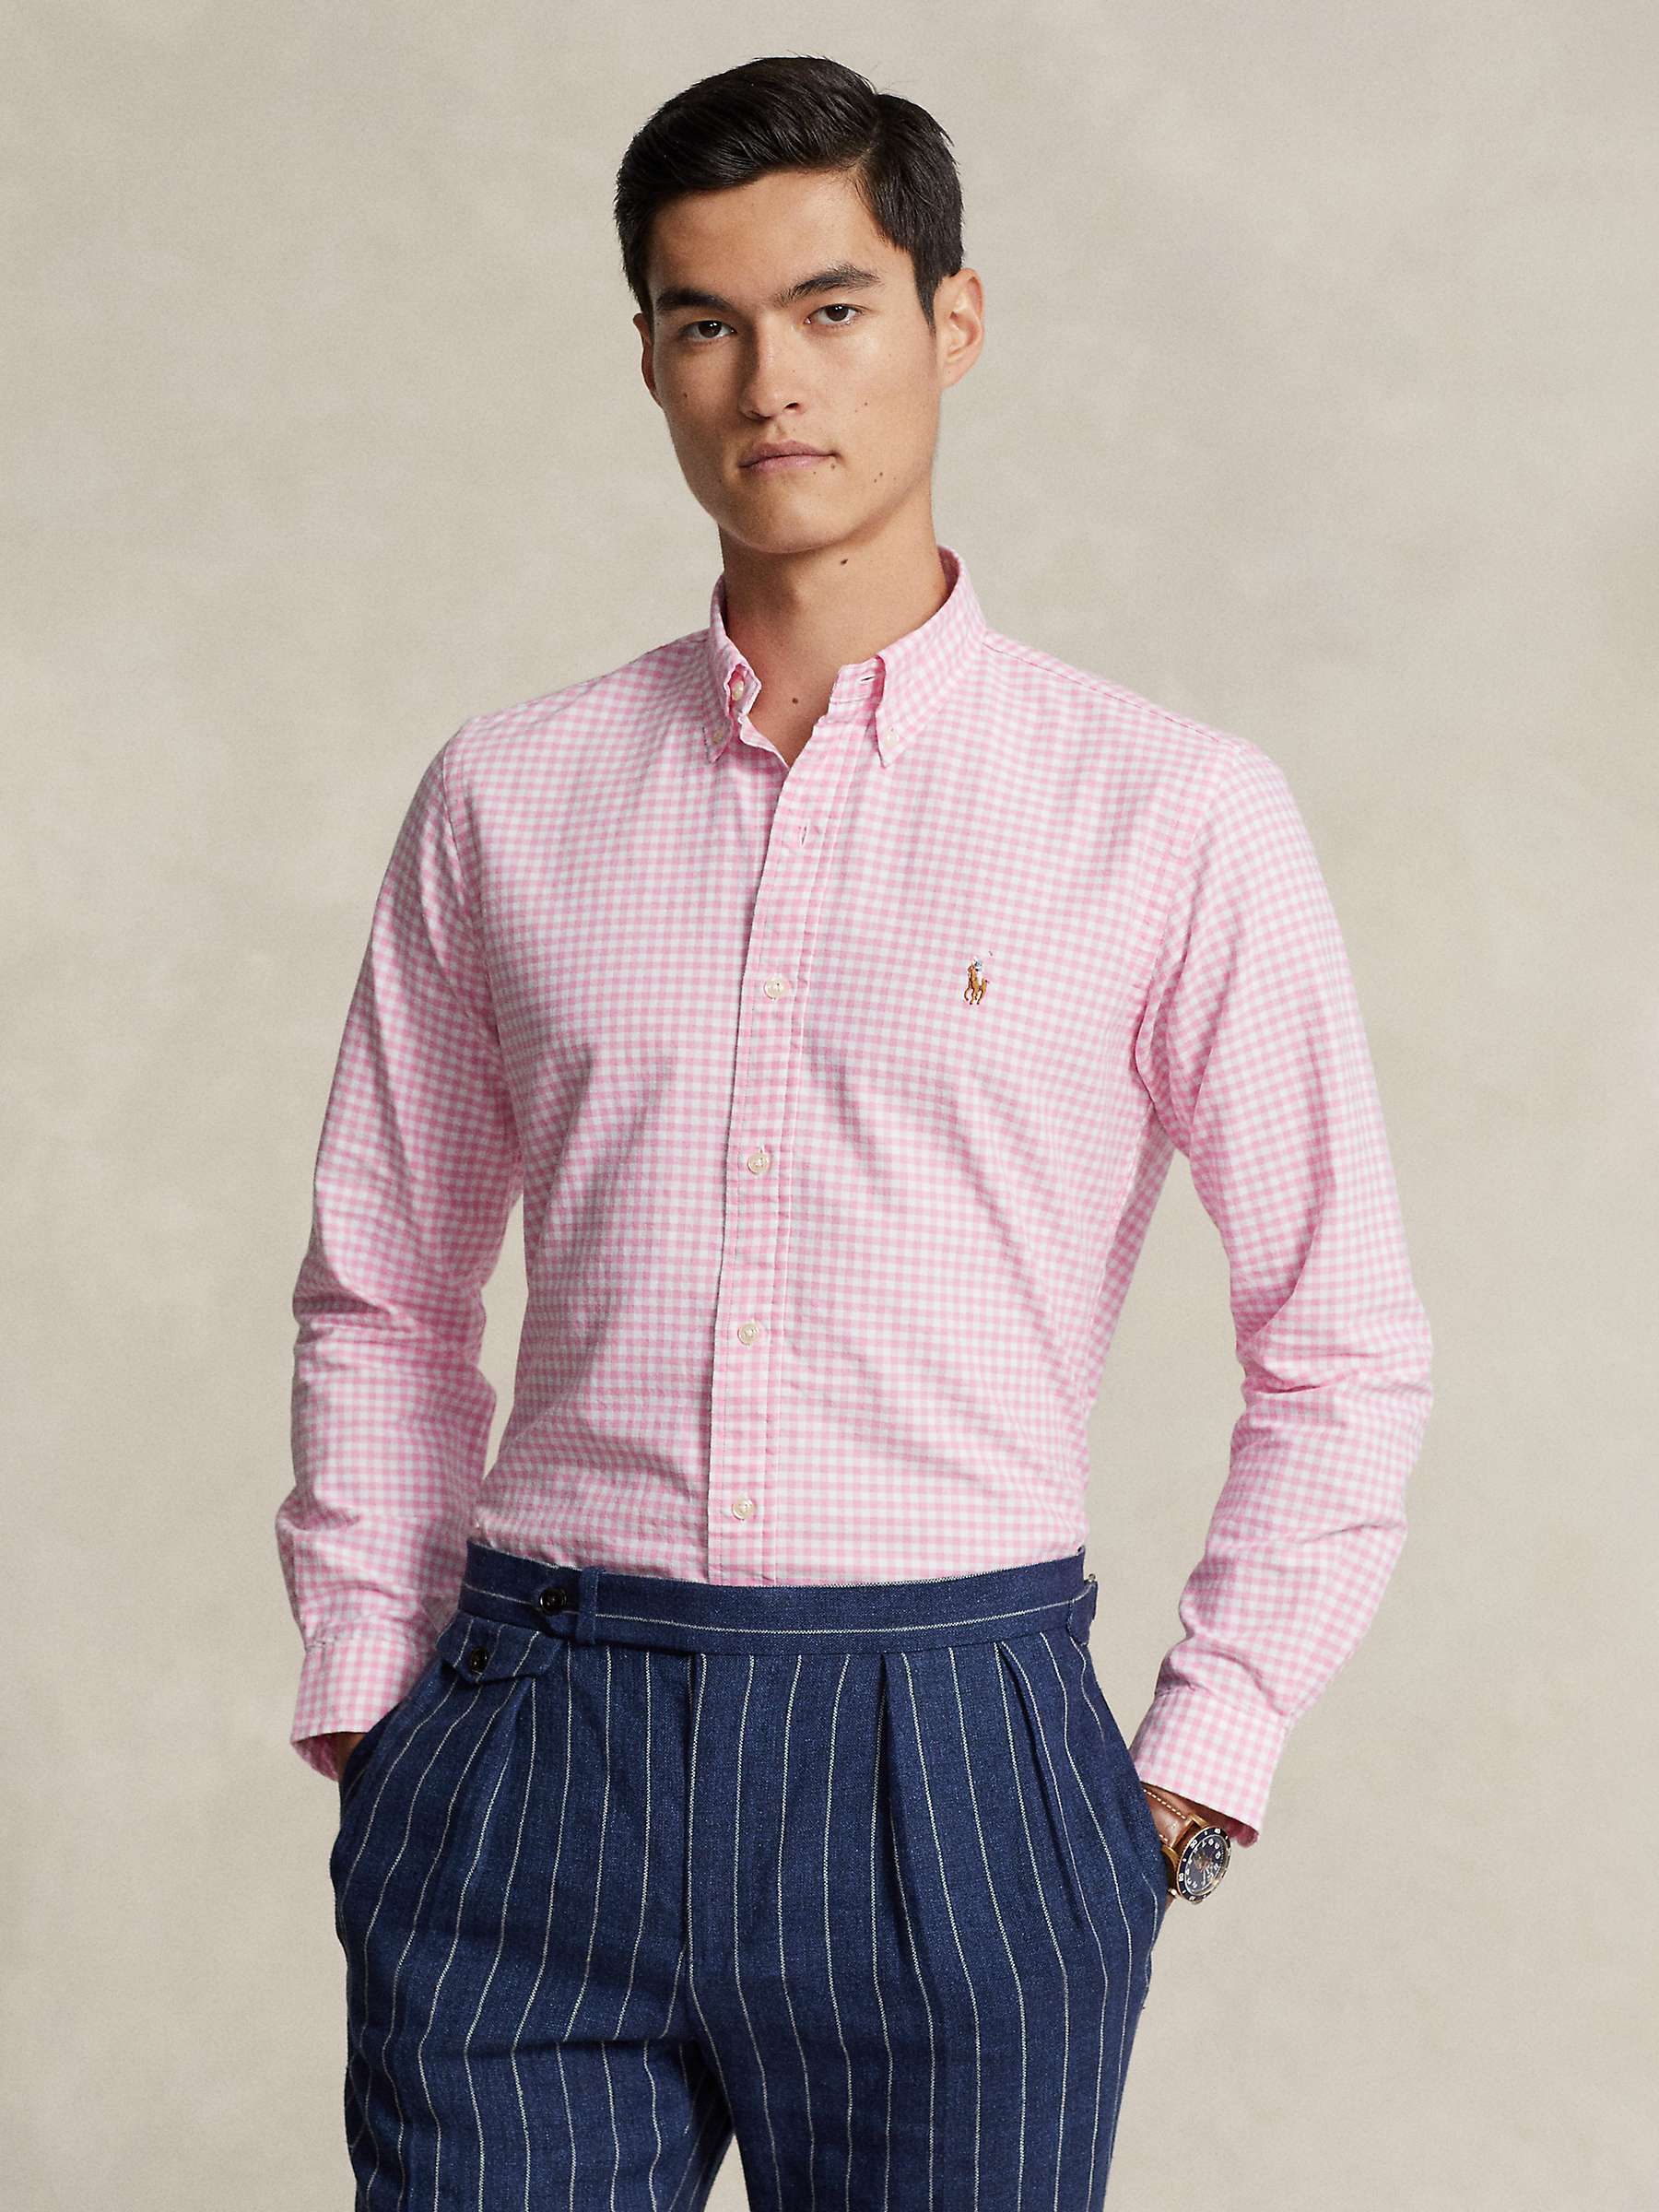 Buy Polo Ralph Lauren Tailored Fit Gingham Oxford Shirt, Pink/White Online at johnlewis.com